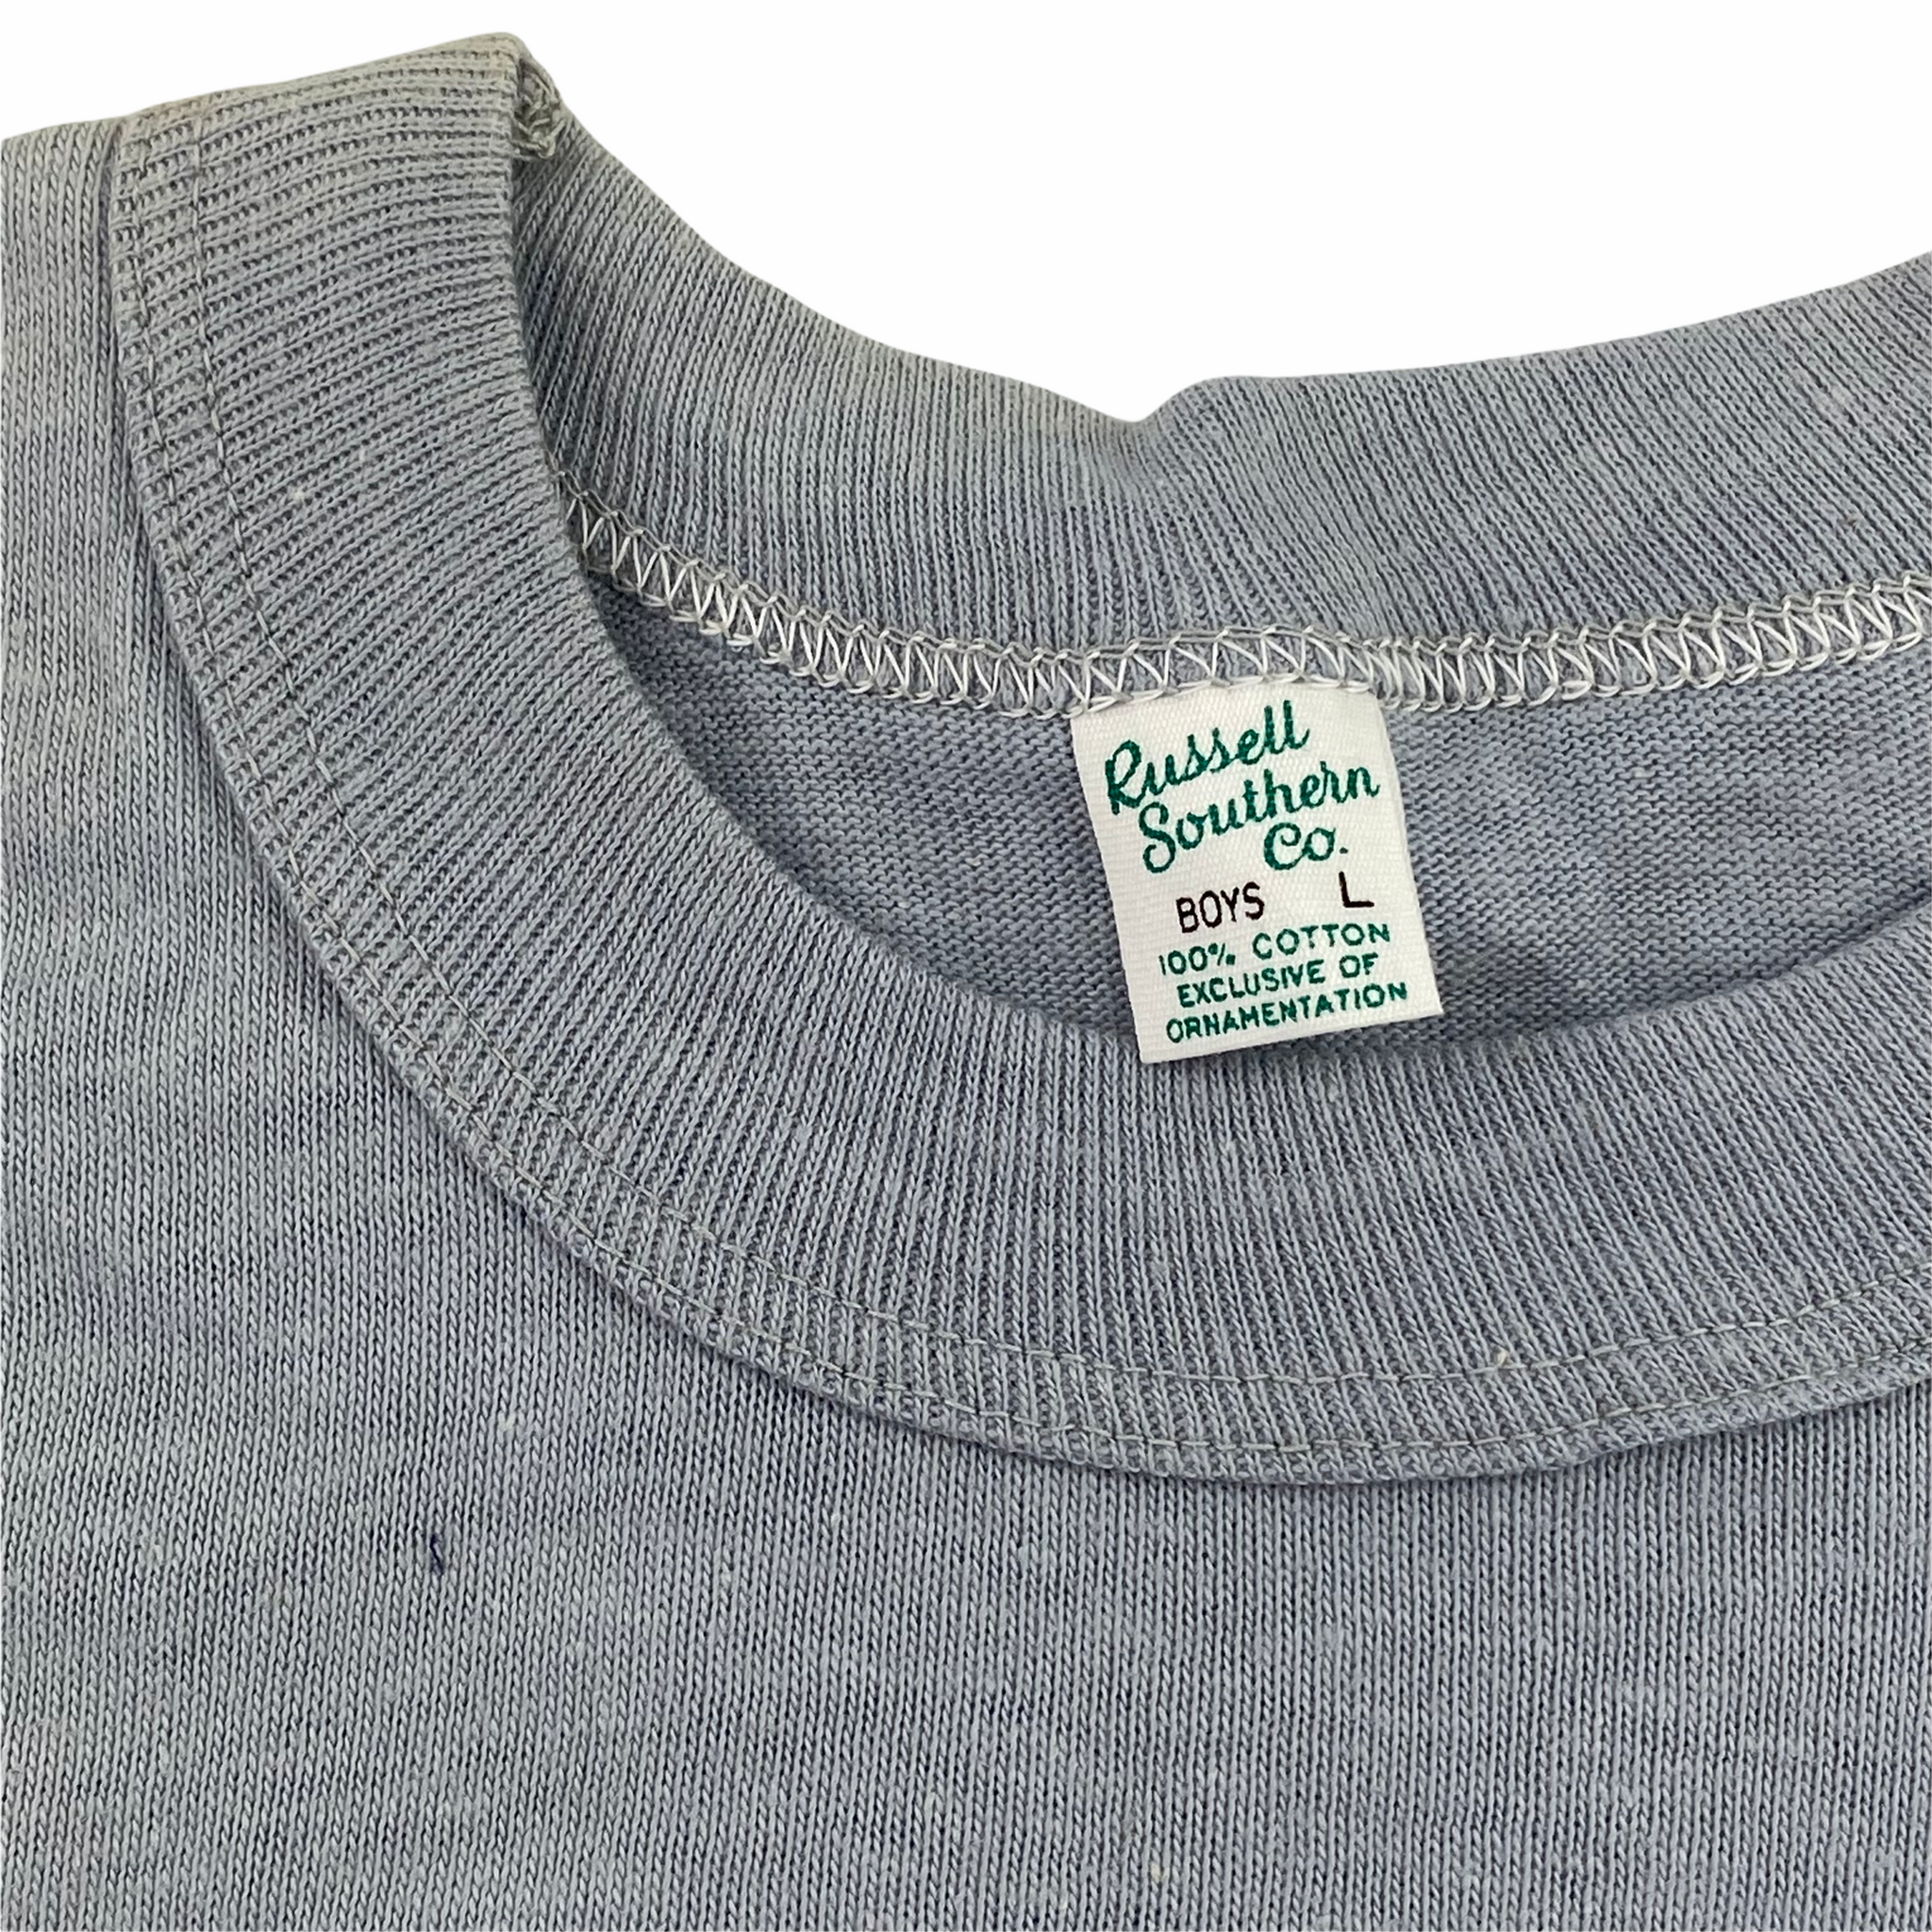 50s Russell southern co blank tee. XS